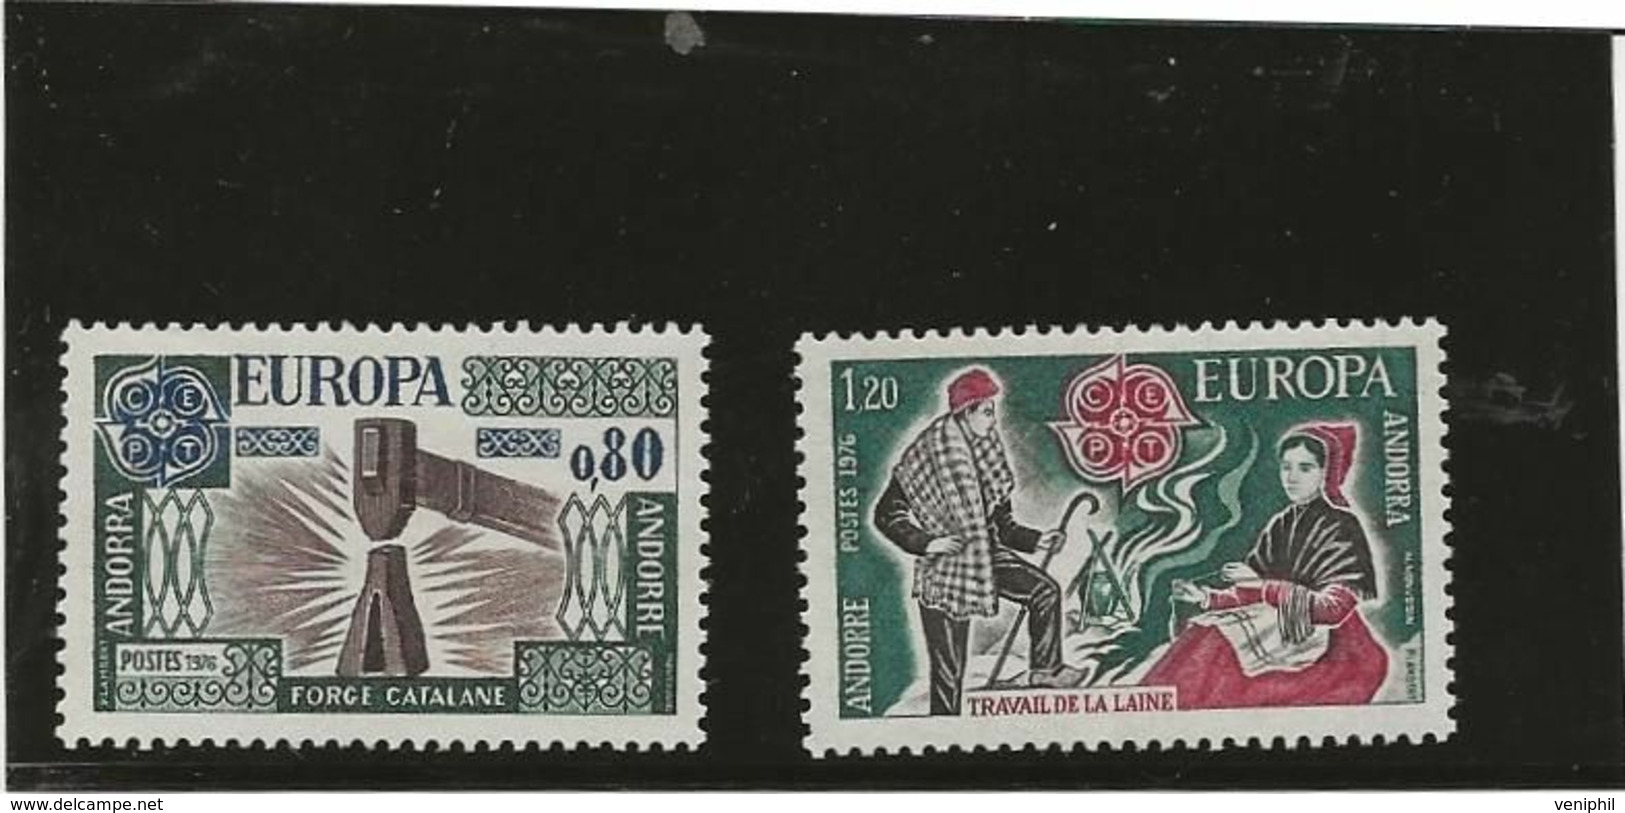 ANDORRE - TIMBRES EUROPA N° 253 Et 254 NEUF SANS CHARNIERE -ANNEE 1976 - COTE : 14,00 € € - Unused Stamps